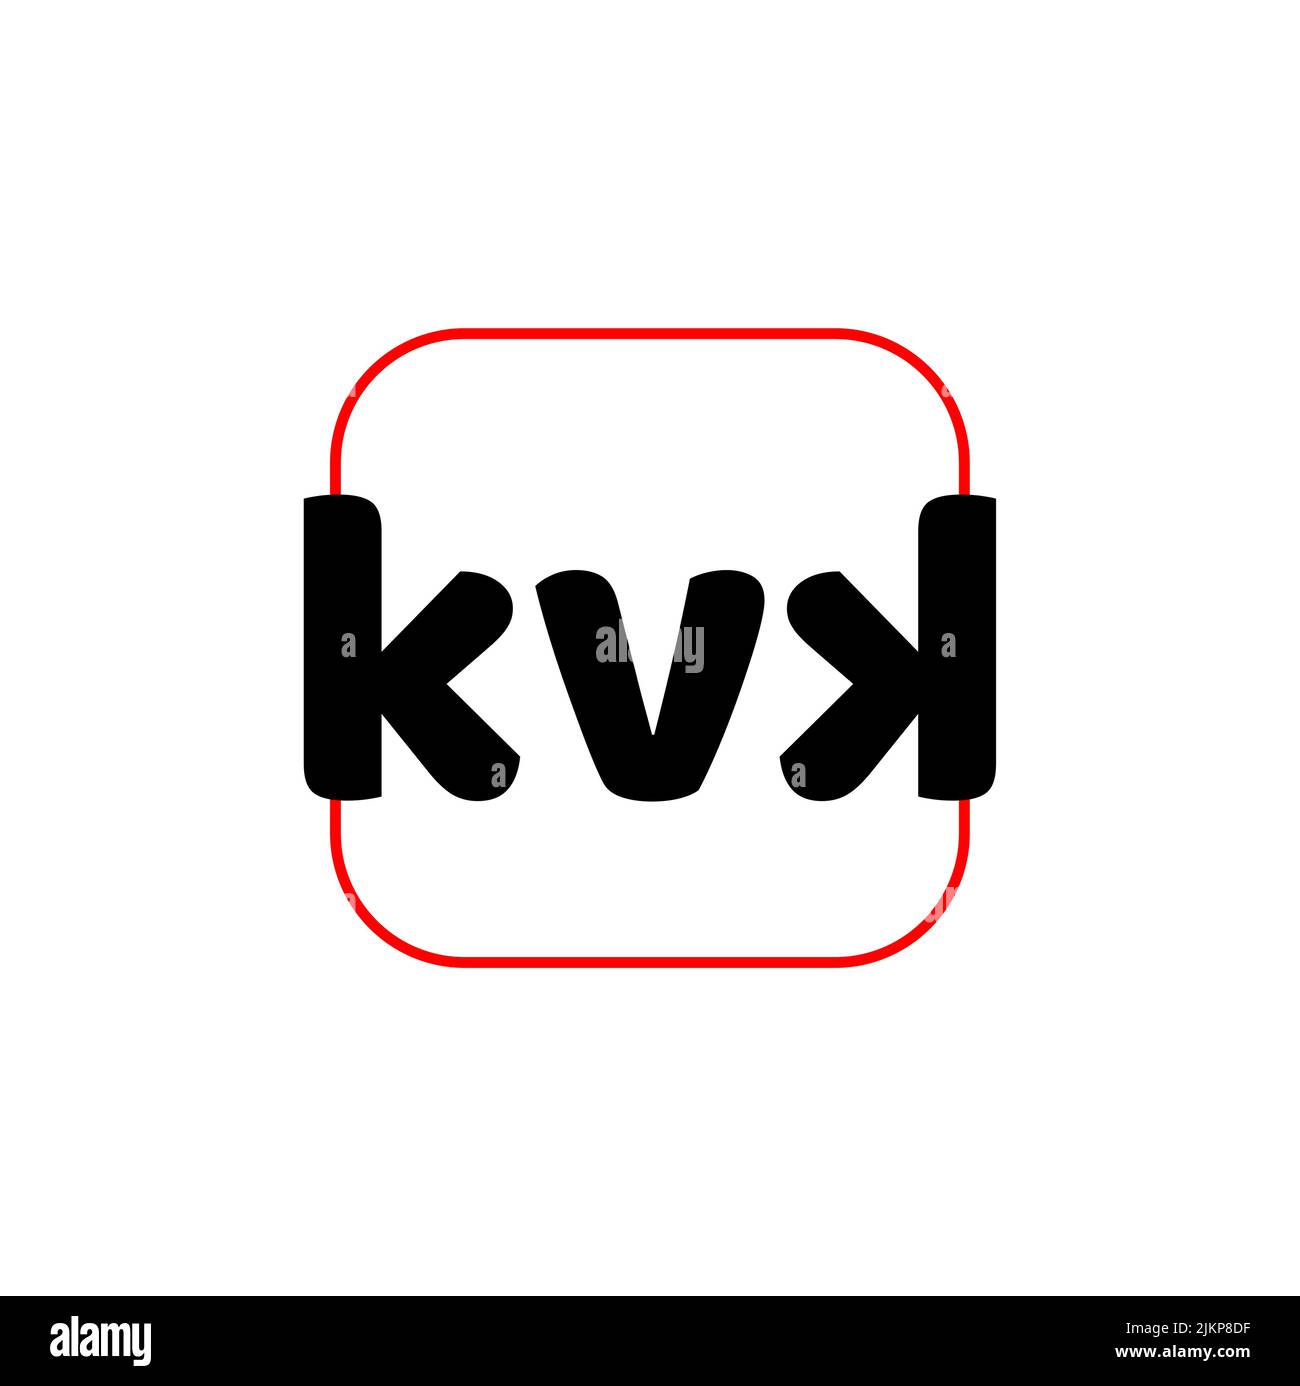 Alphabet letters kvk for logo isolated on a white background Stock Vector